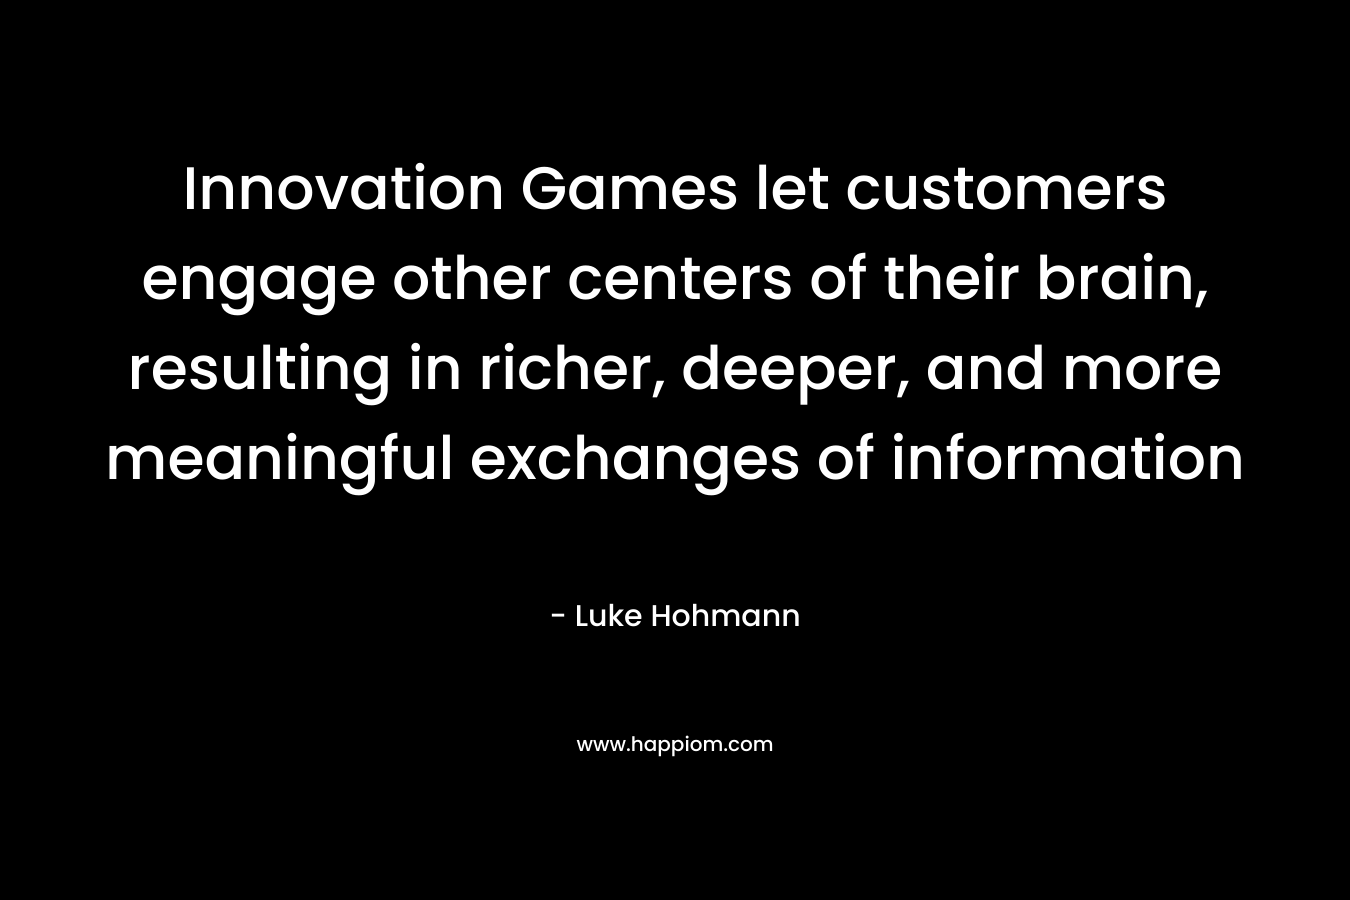 Innovation Games let customers engage other centers of their brain, resulting in richer, deeper, and more meaningful exchanges of information – Luke Hohmann